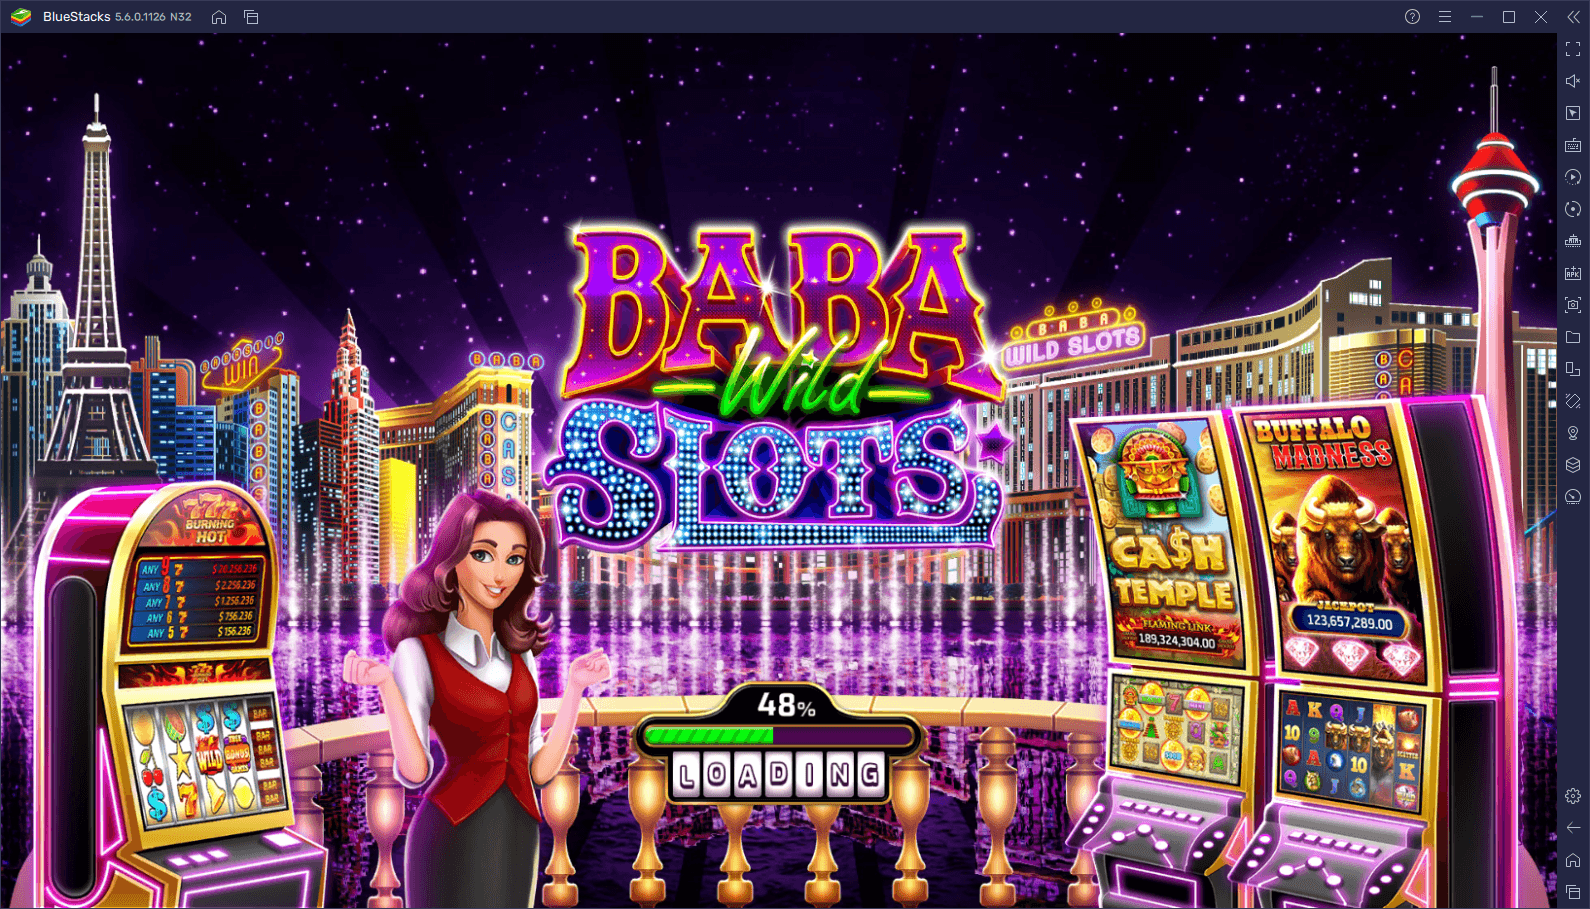 How to Play Baba Wild Slots - Vegas Casino on PC with BlueStacks